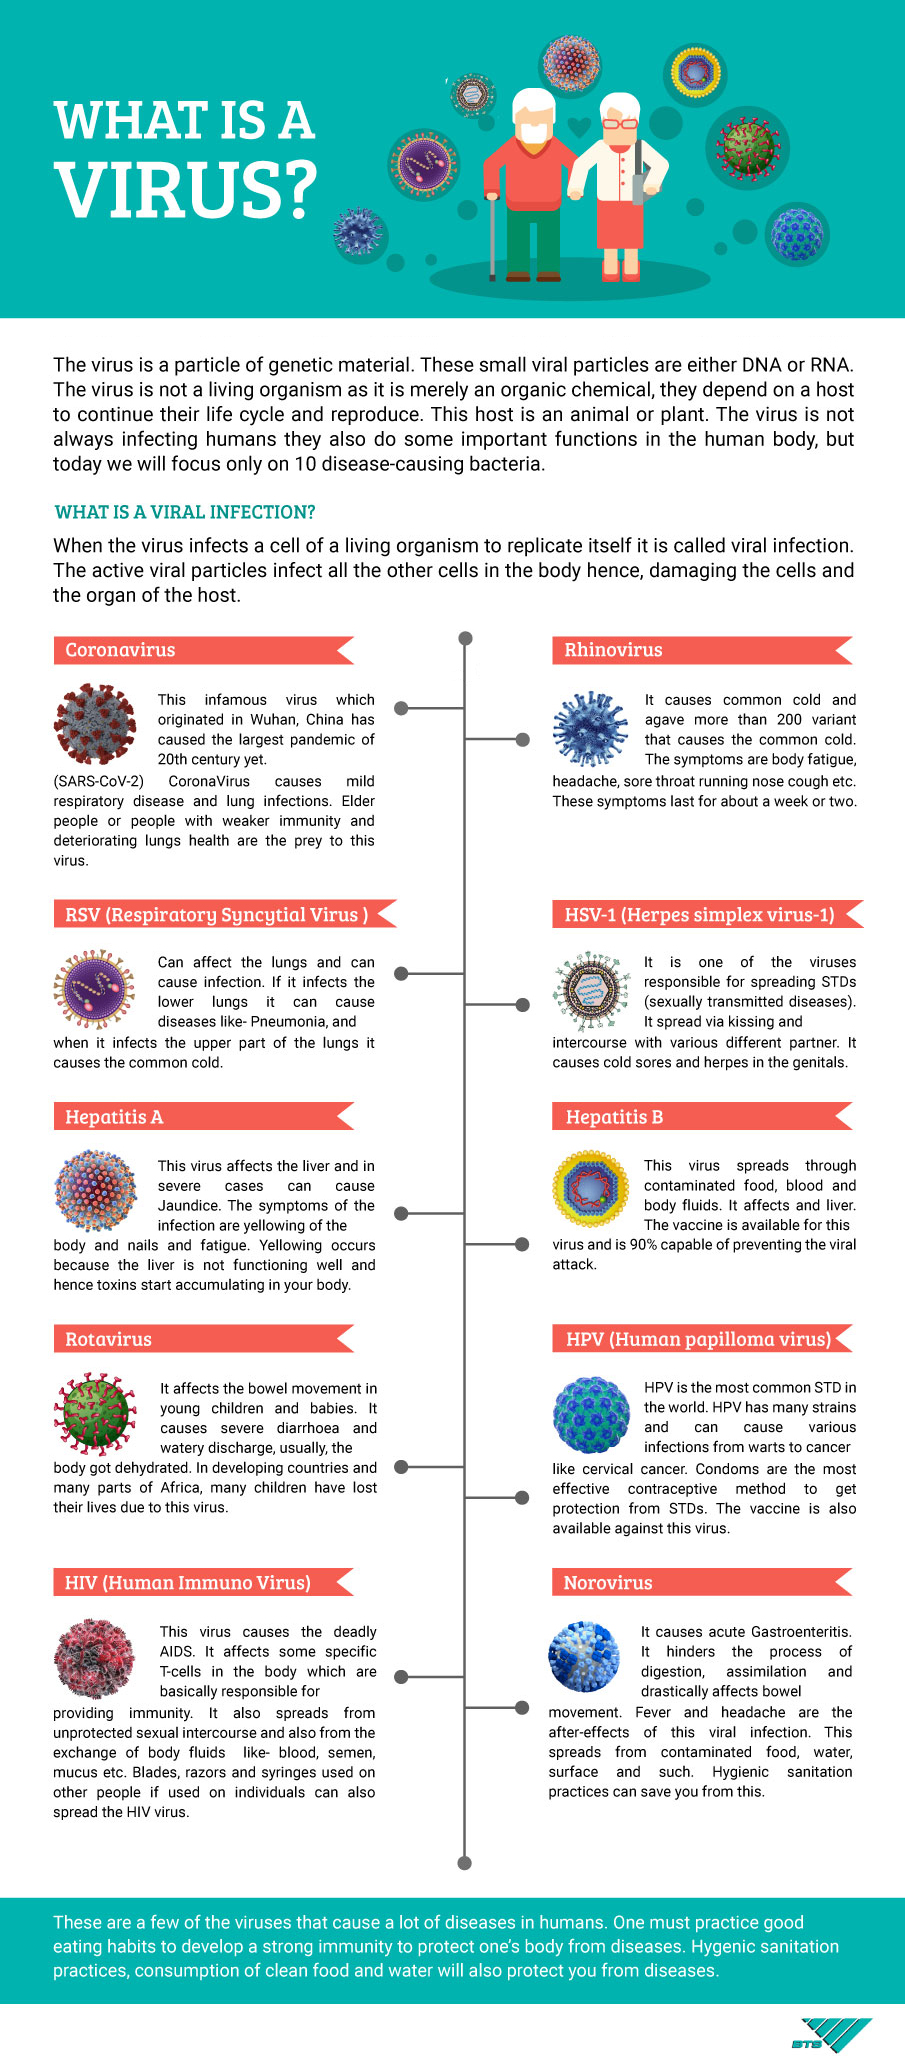 What is a Virus biotech infographic